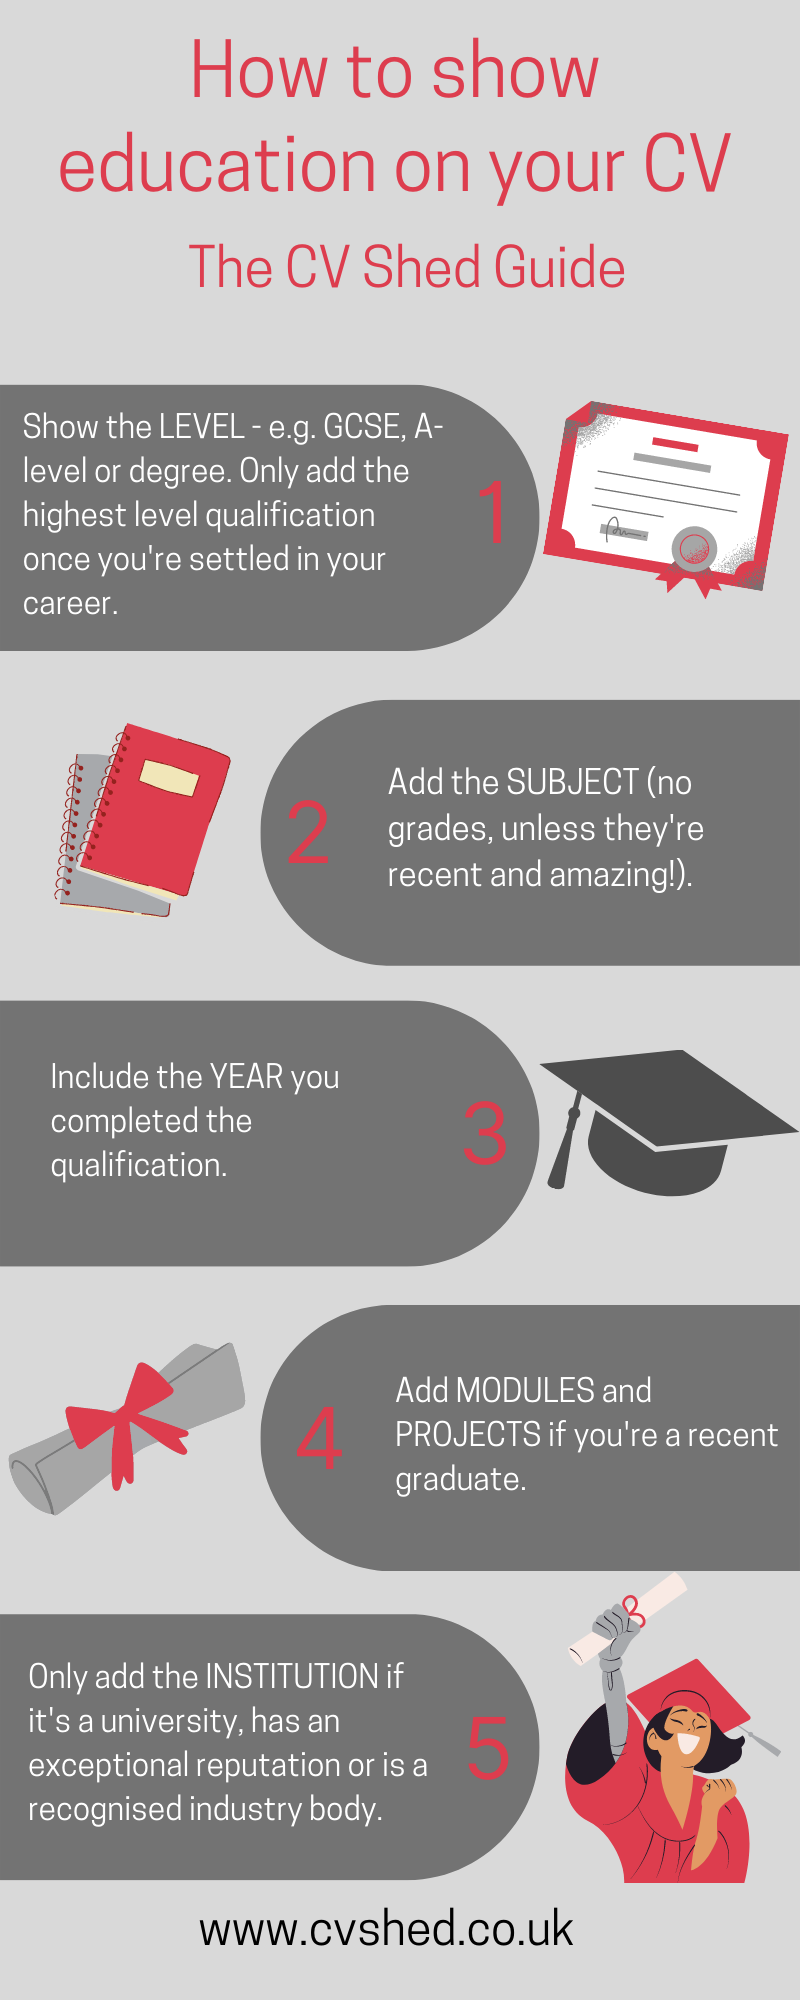 Infographic showing how to put education on your CV